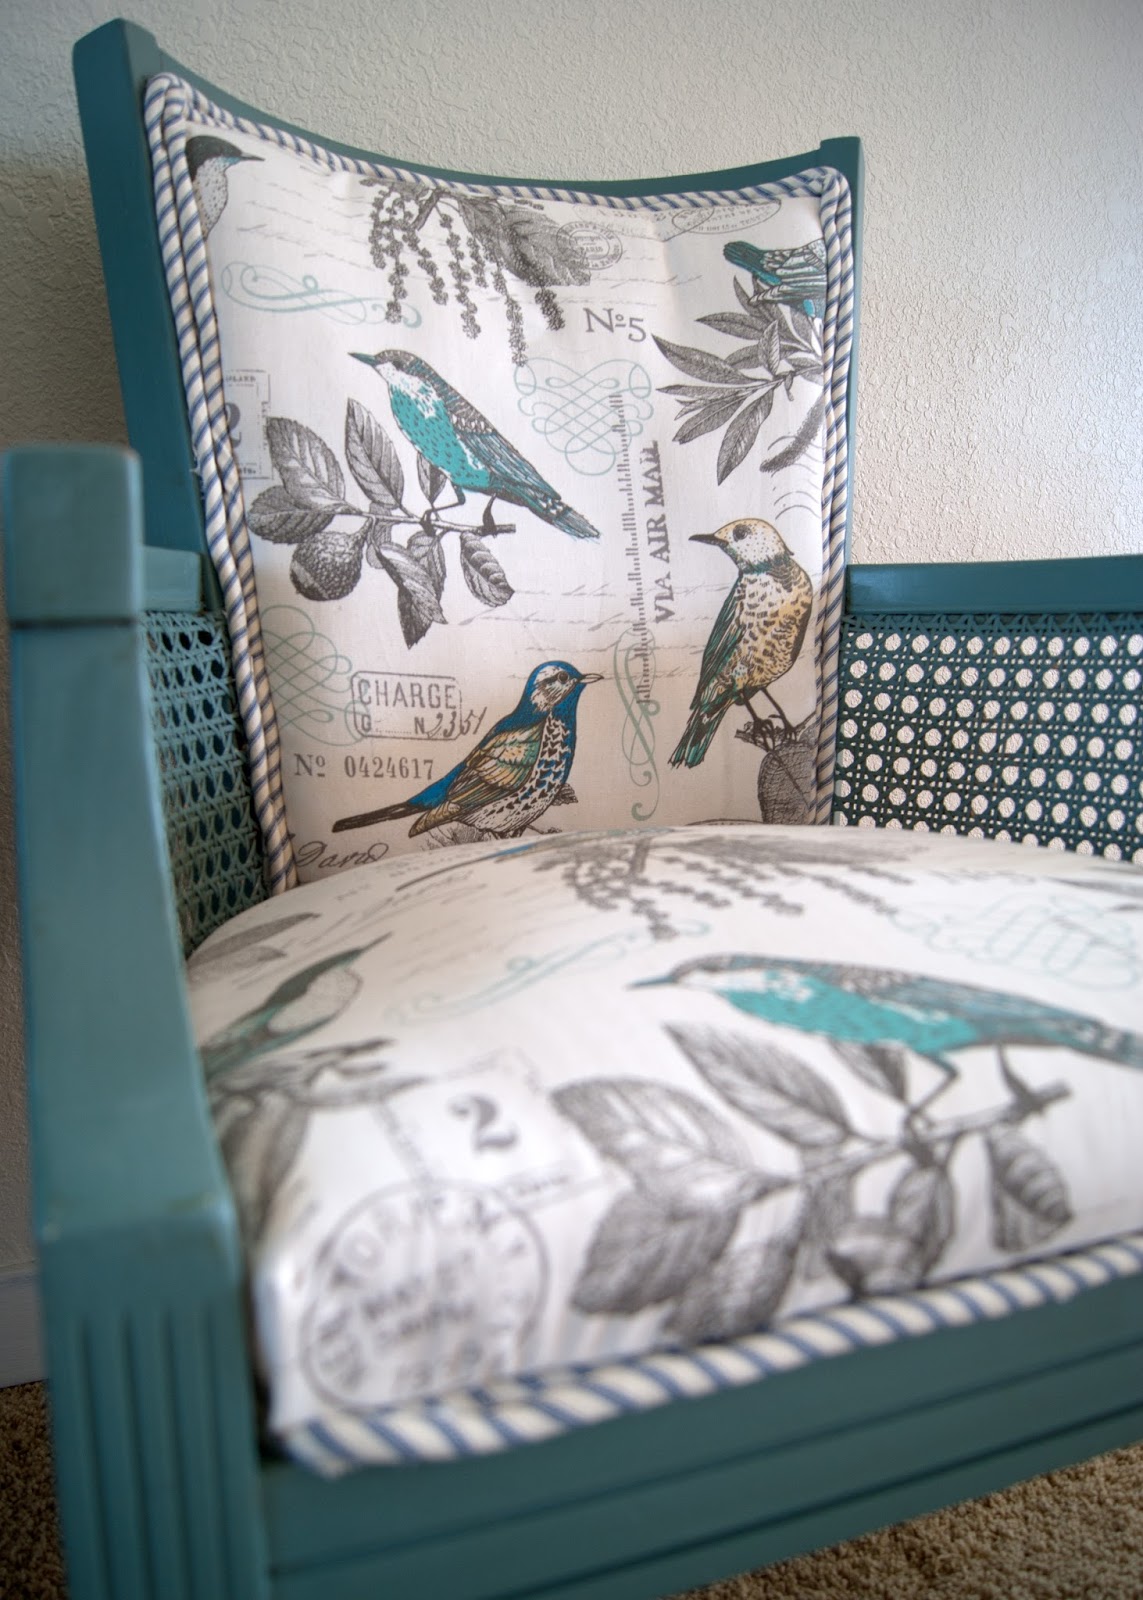 Chair Upholstering 101 - the unprofessional guide to giving a chair a makeover - caned chairs, mattress ticking, bird fabric